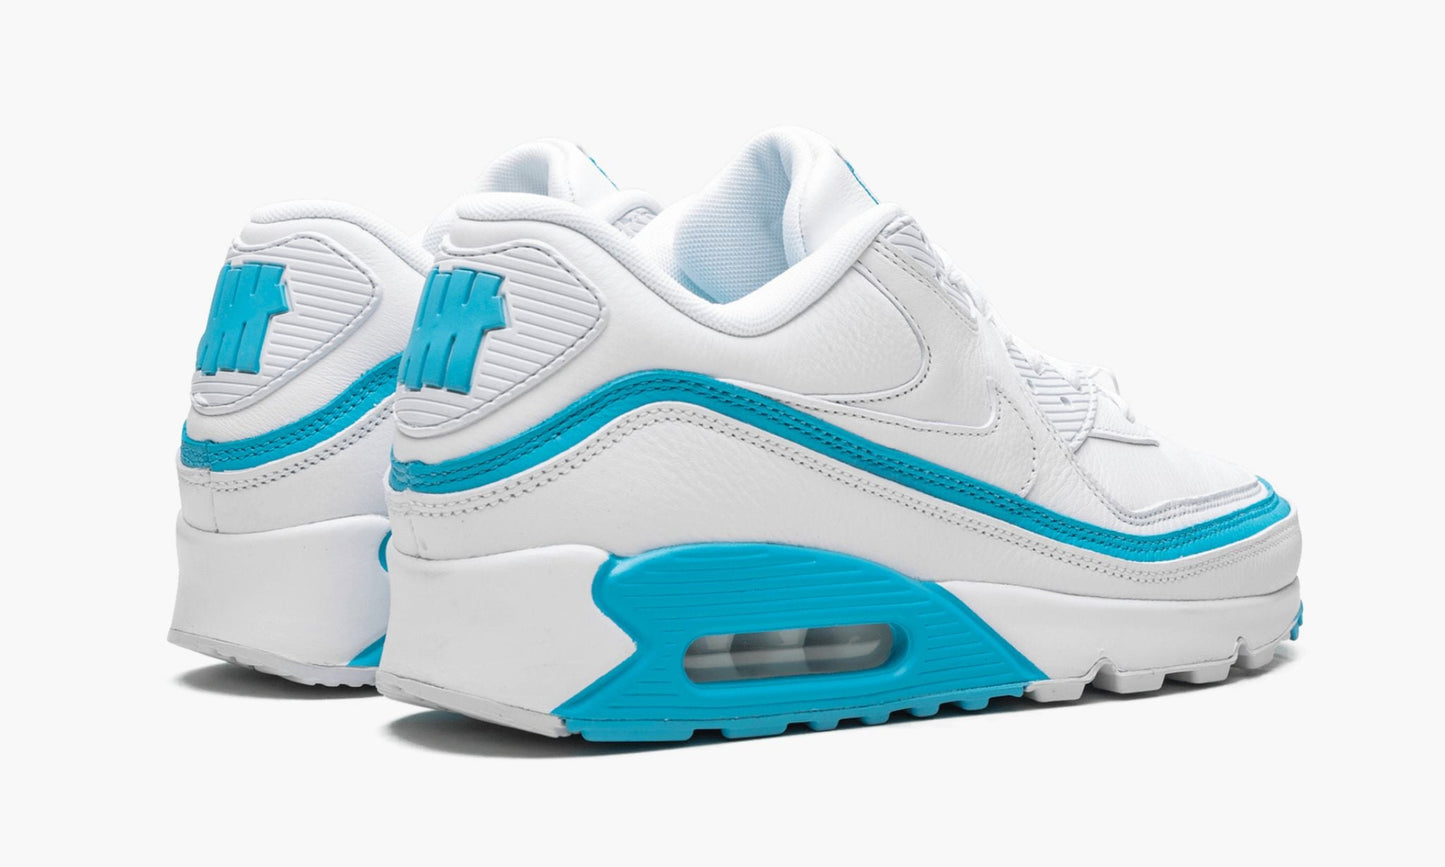 Air Max 90 / UNDFTD "Undefeated - White/Blue Fury"